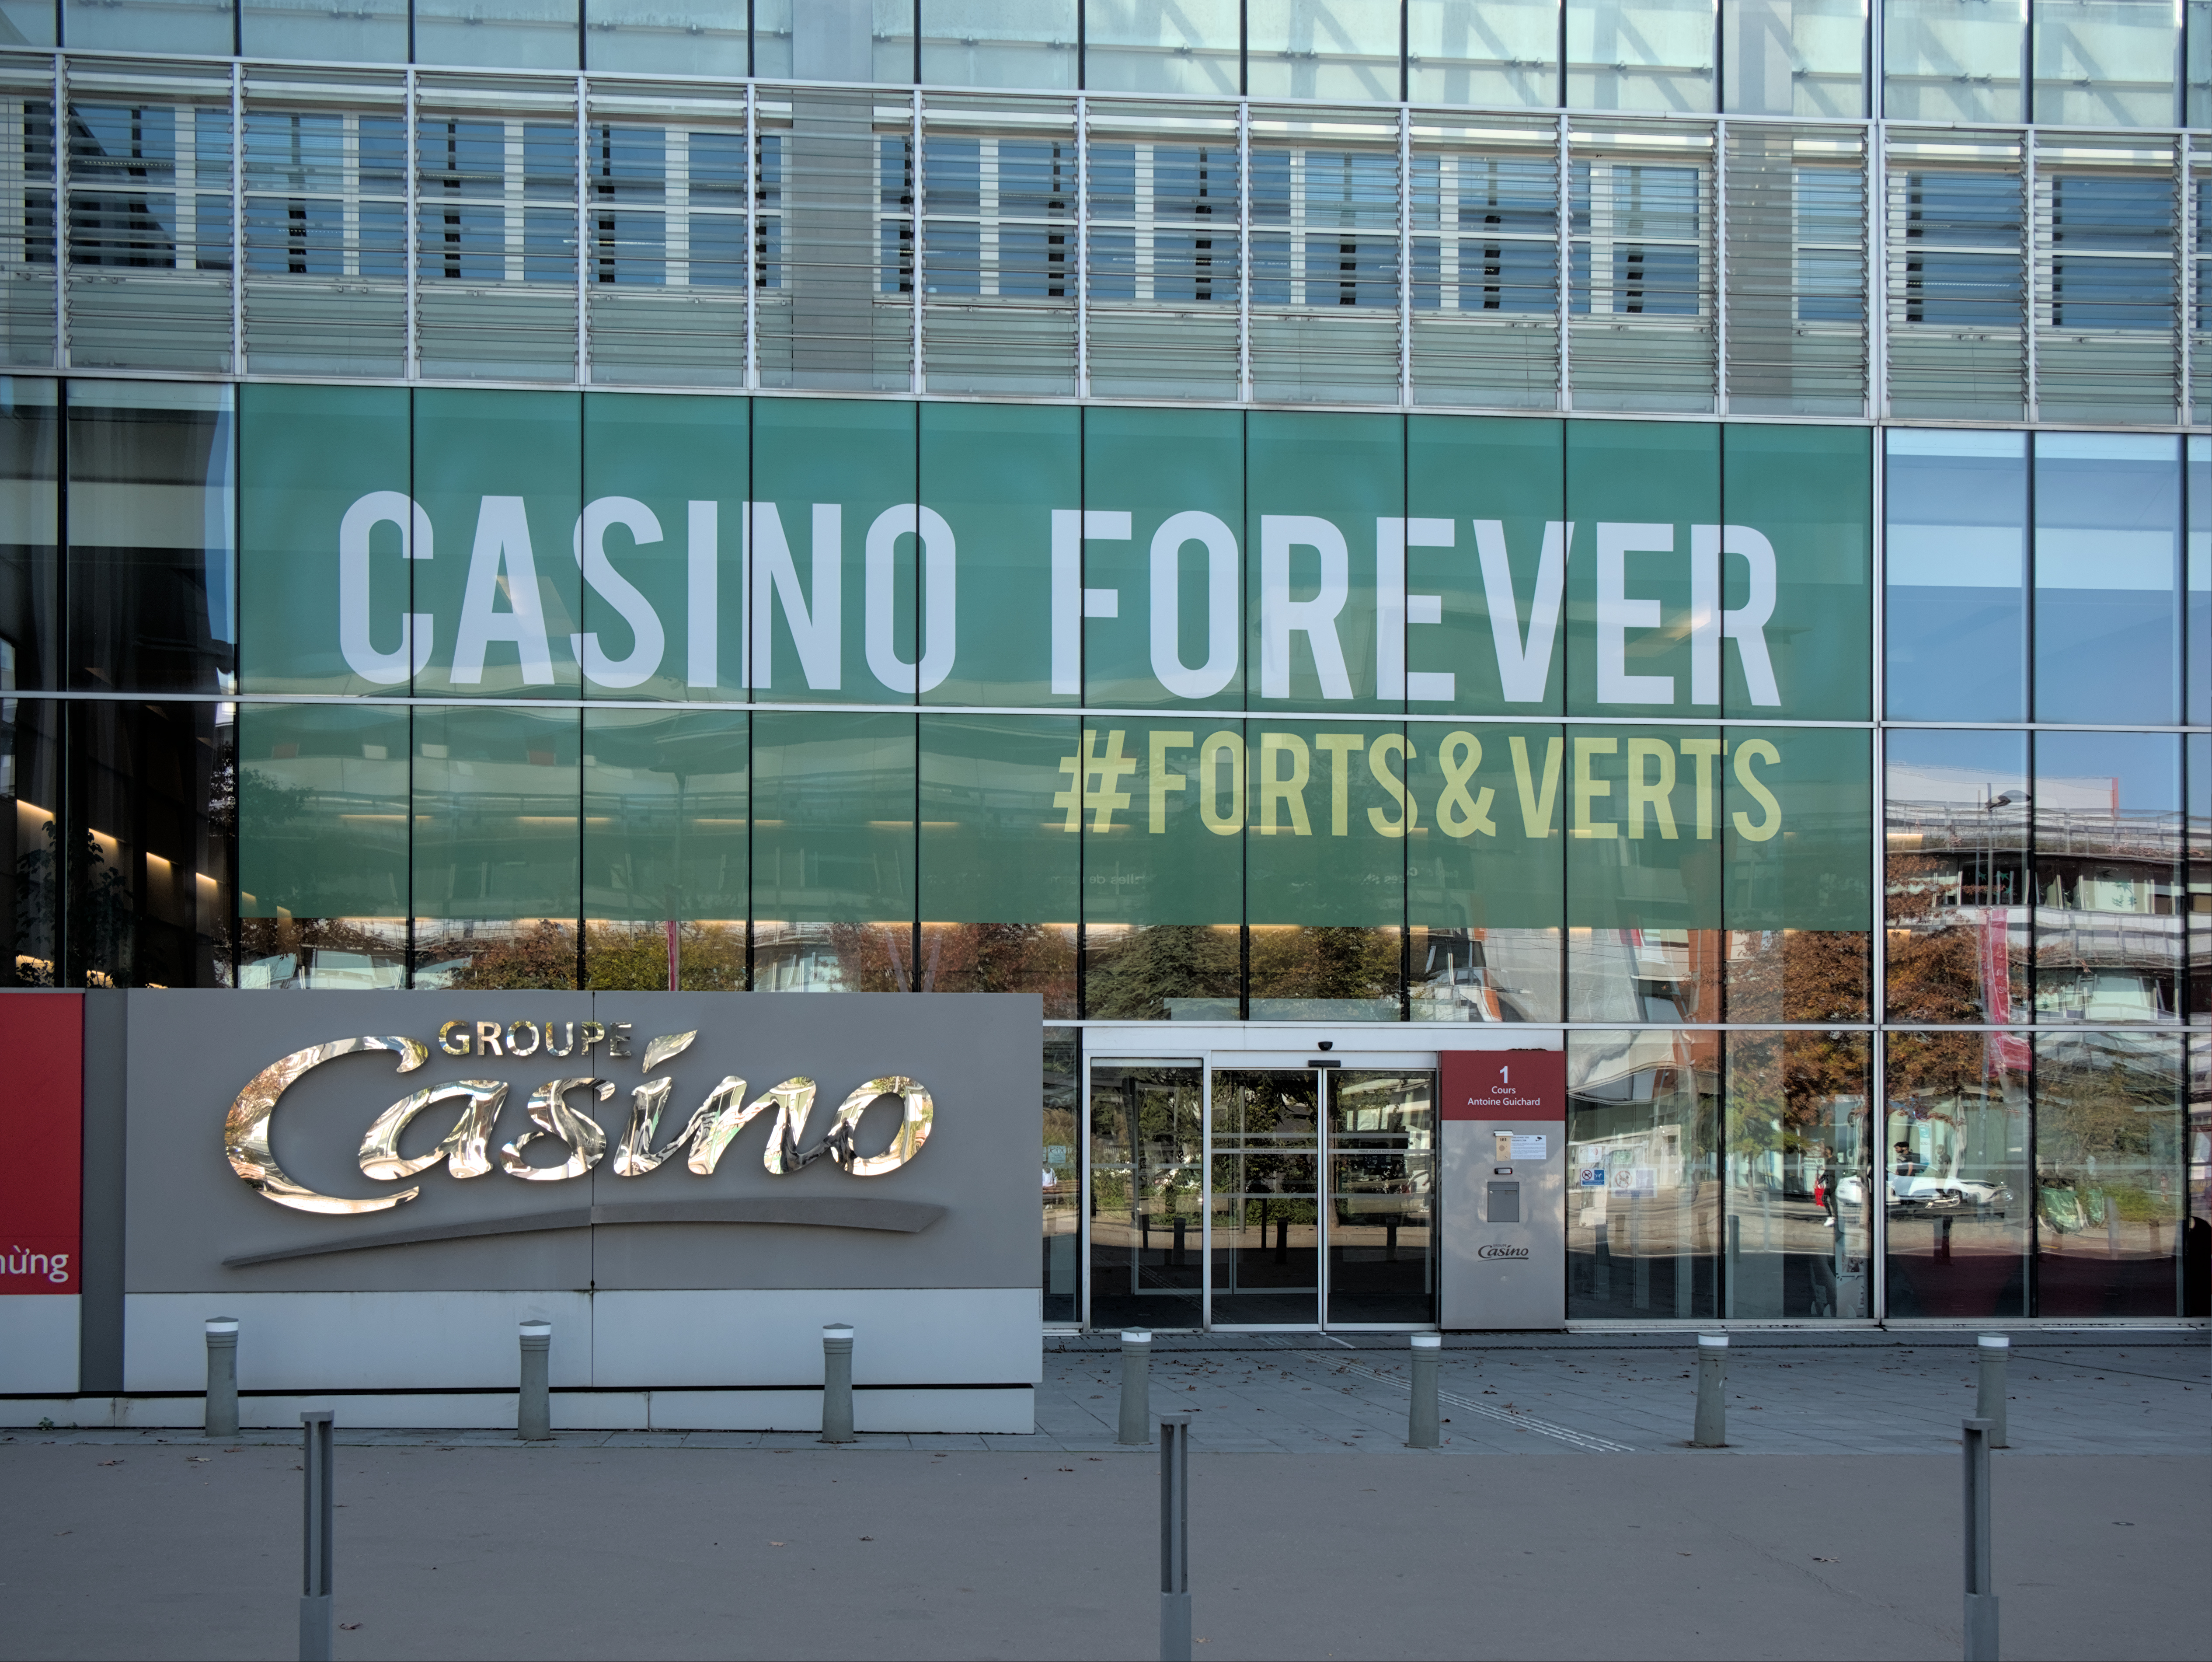 3. Implications of the Growing Popularity of Social Casinos